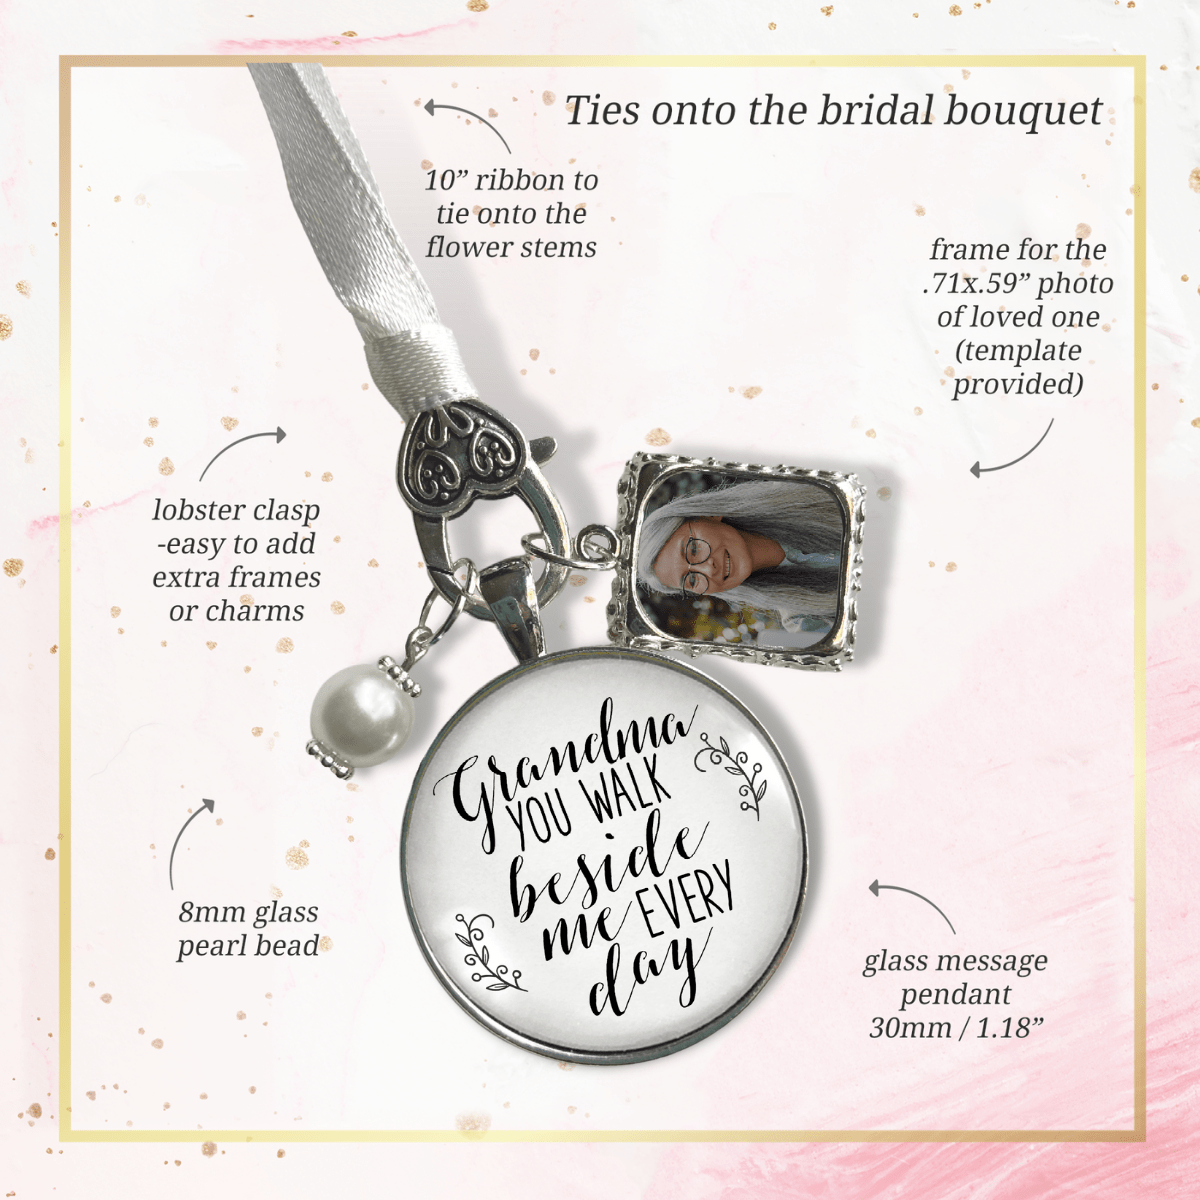 Bridal Bouquet Charm Grandma Picture Frame Wedding Memorial Silver Finish Jewelry - Gutsy Goodness Handmade Jewelry Gifts